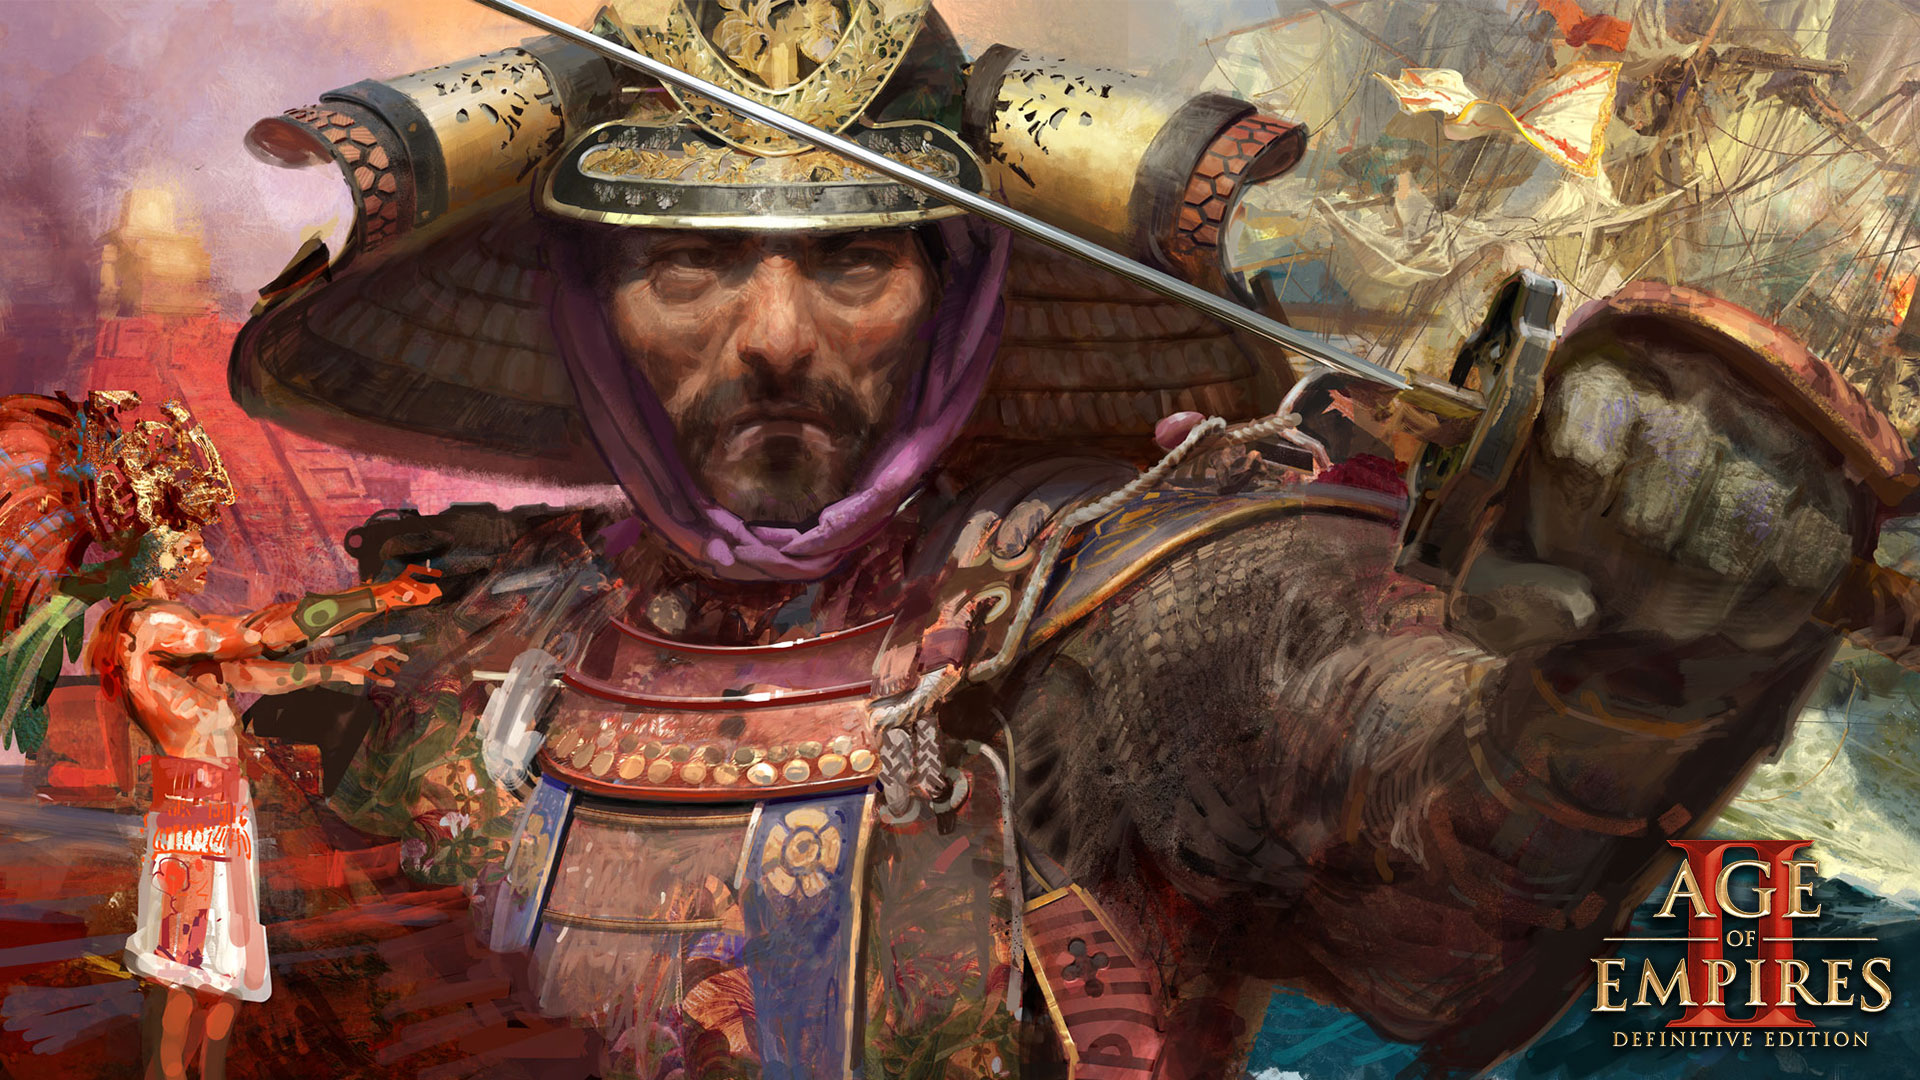 Interview with Craig Mullins - An Age of Empires Illustrator - Age of Empir...